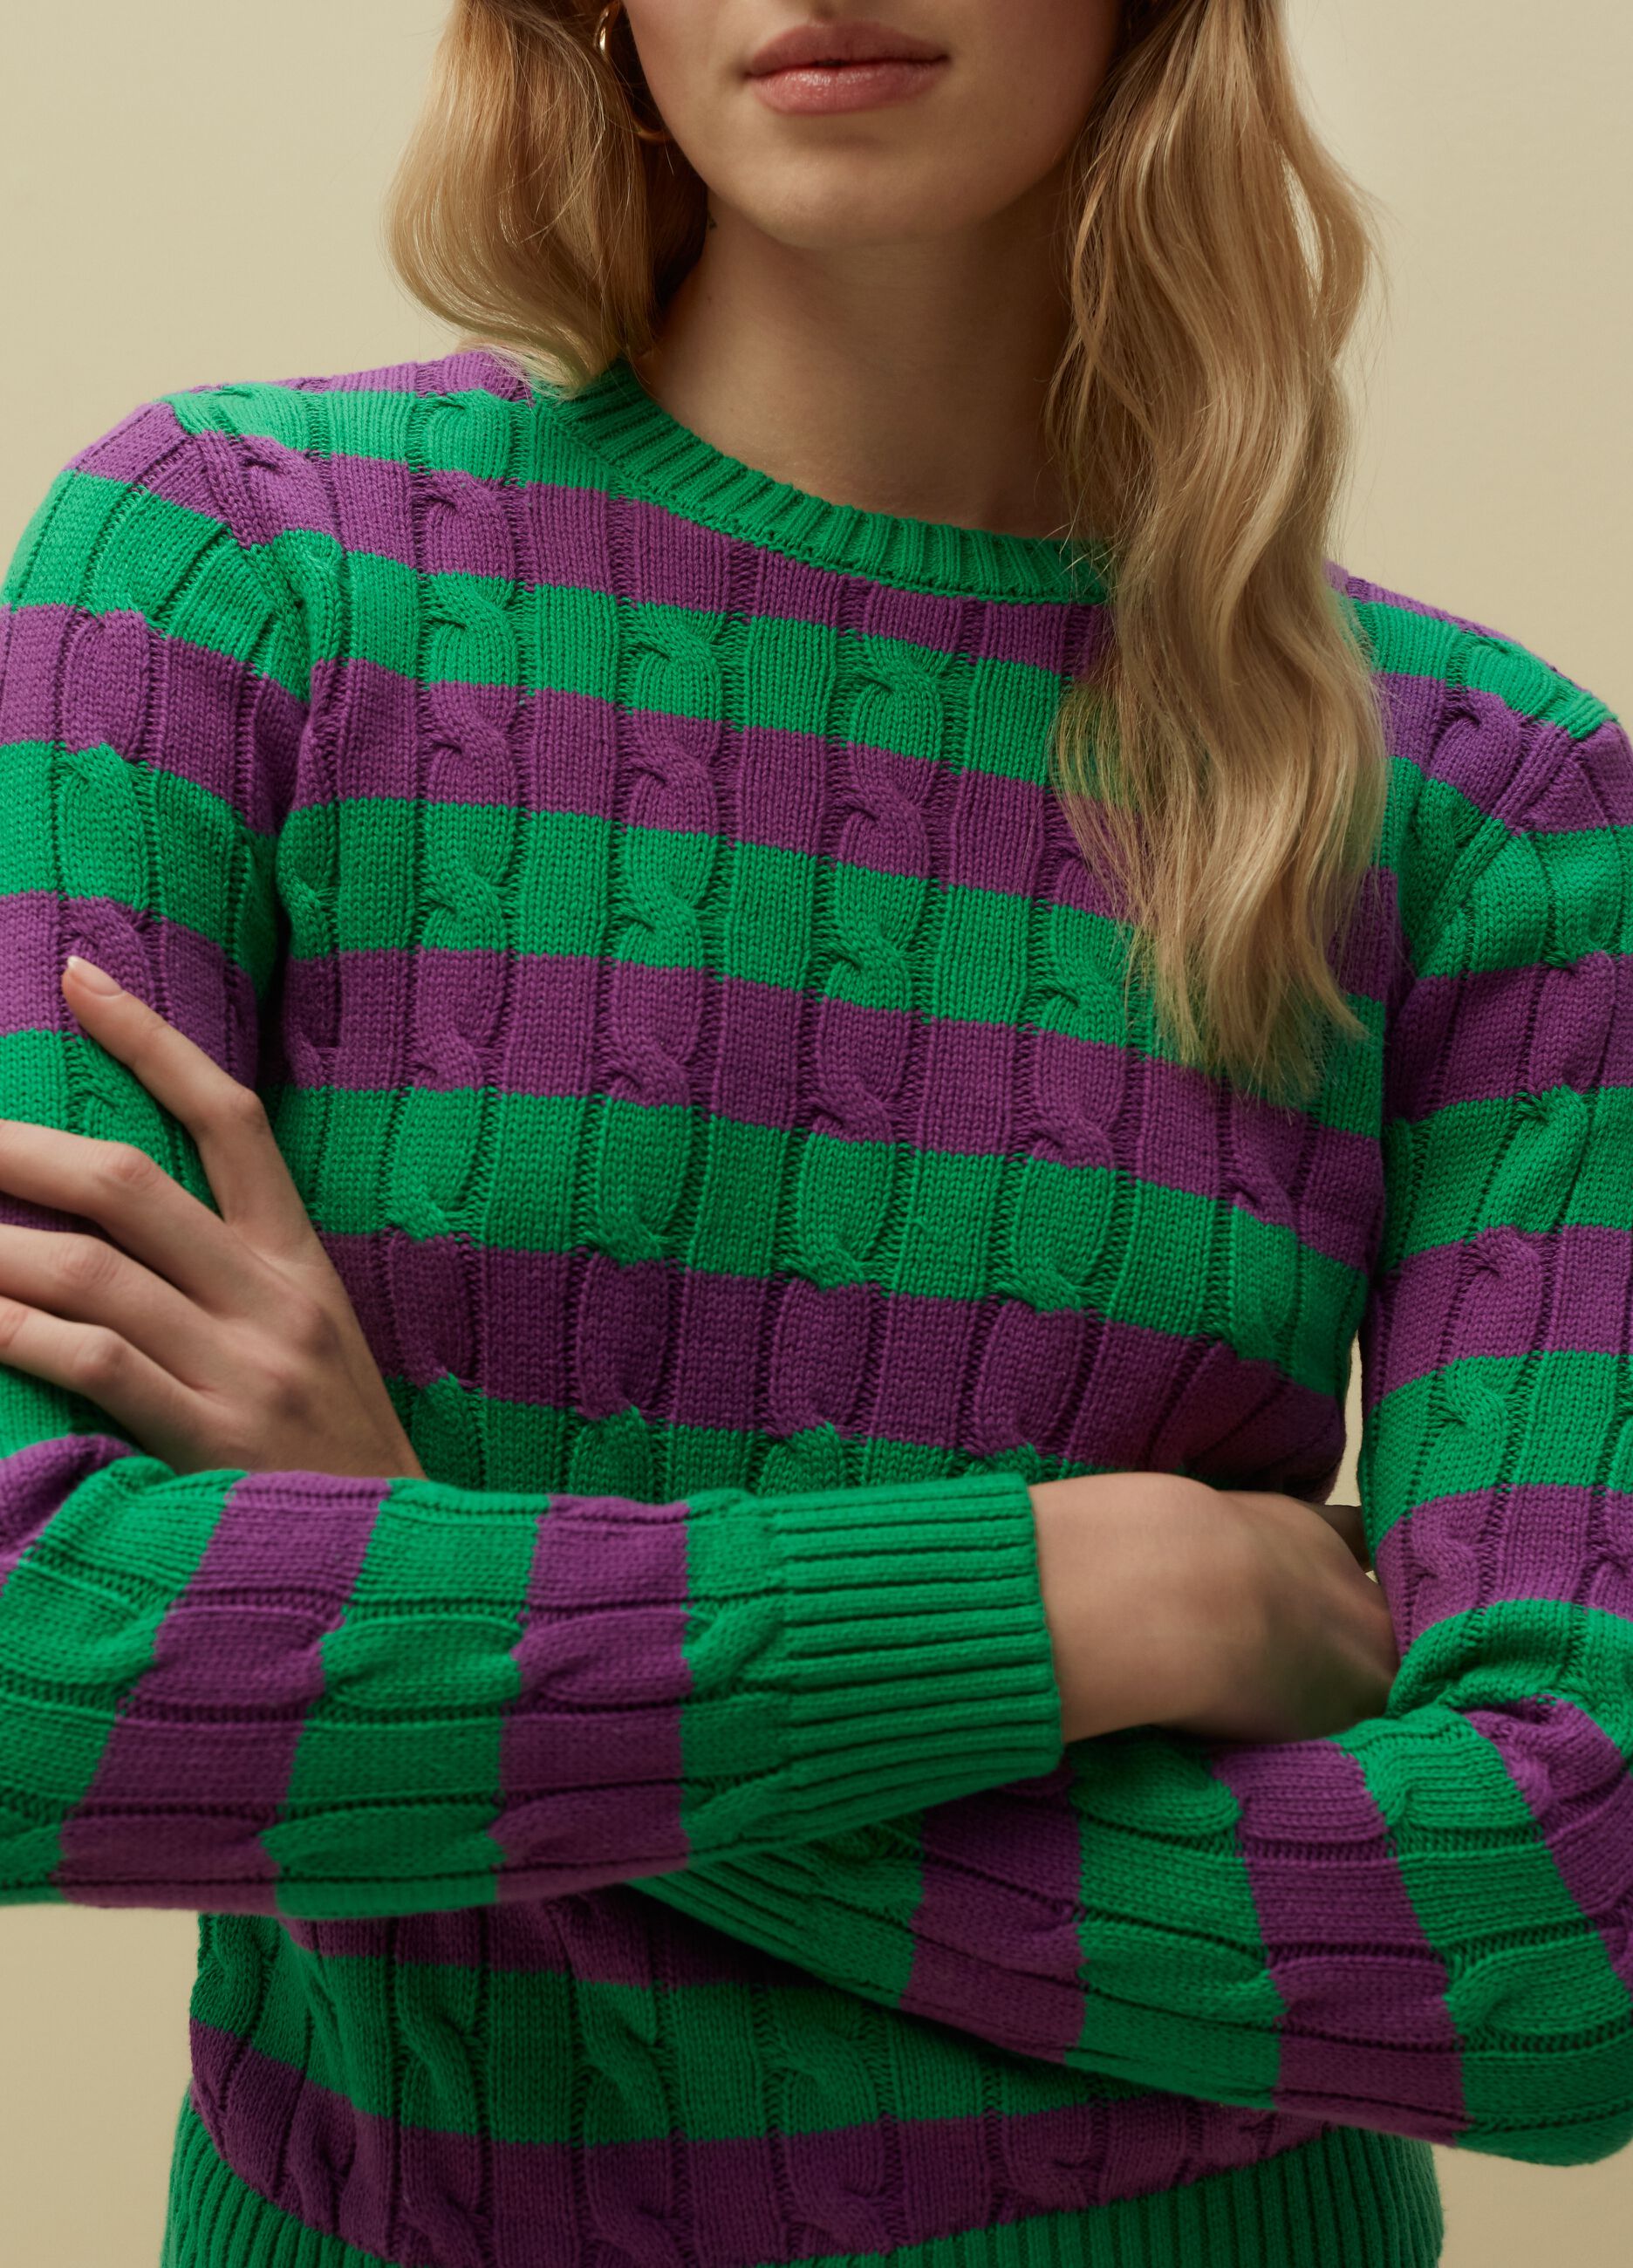 Striped pullover with ribbed design